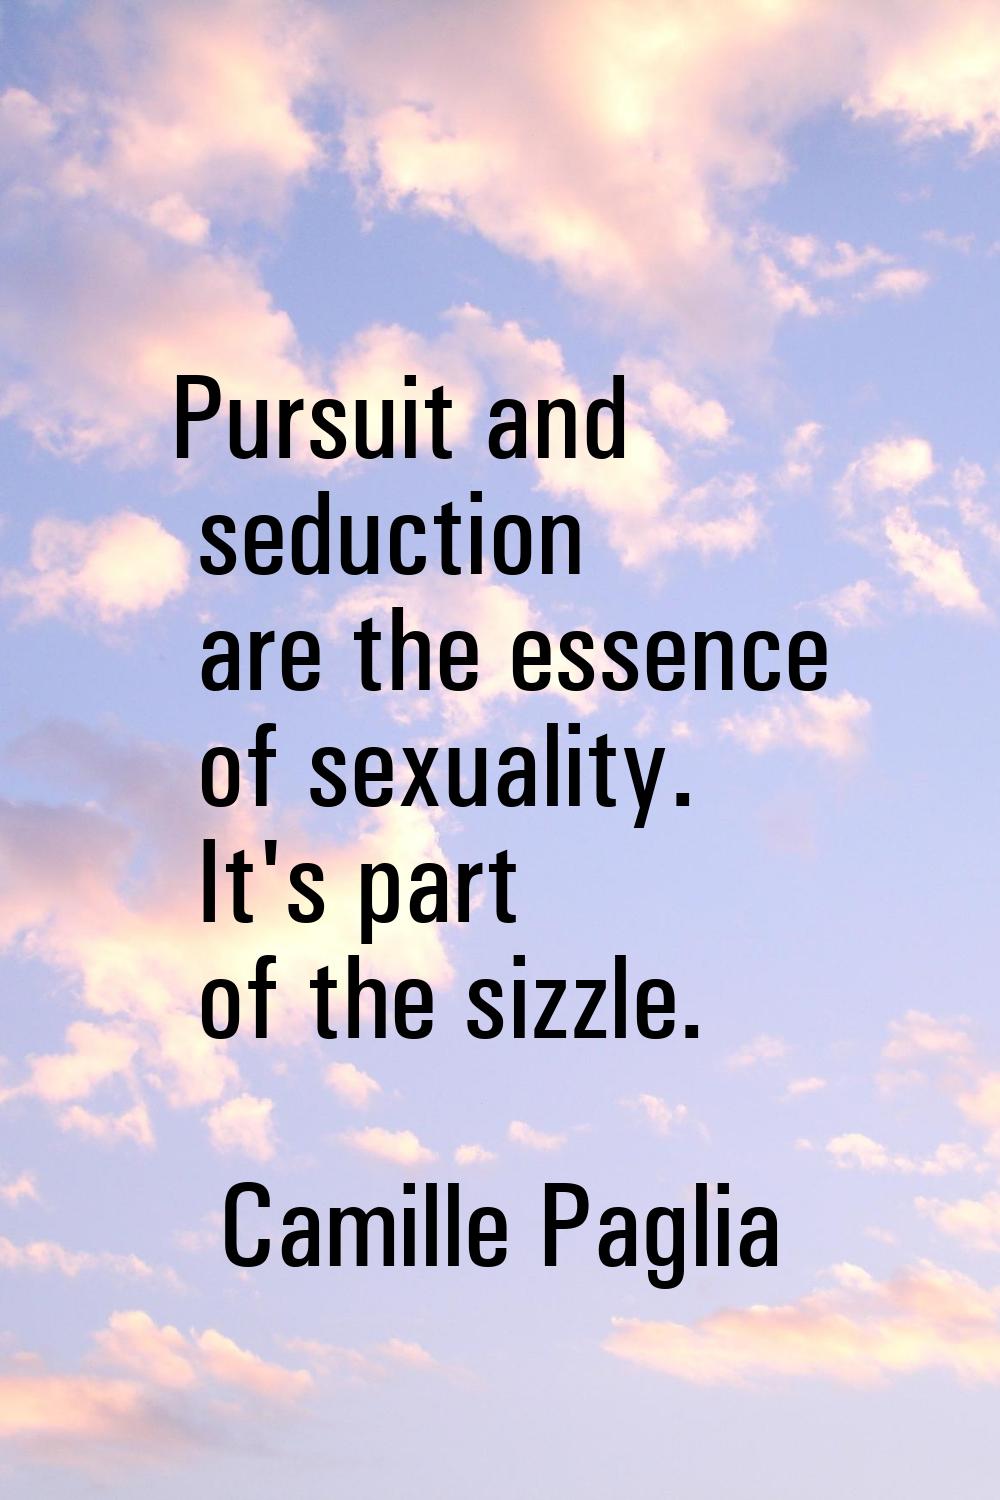 Pursuit and seduction are the essence of sexuality. It's part of the sizzle.